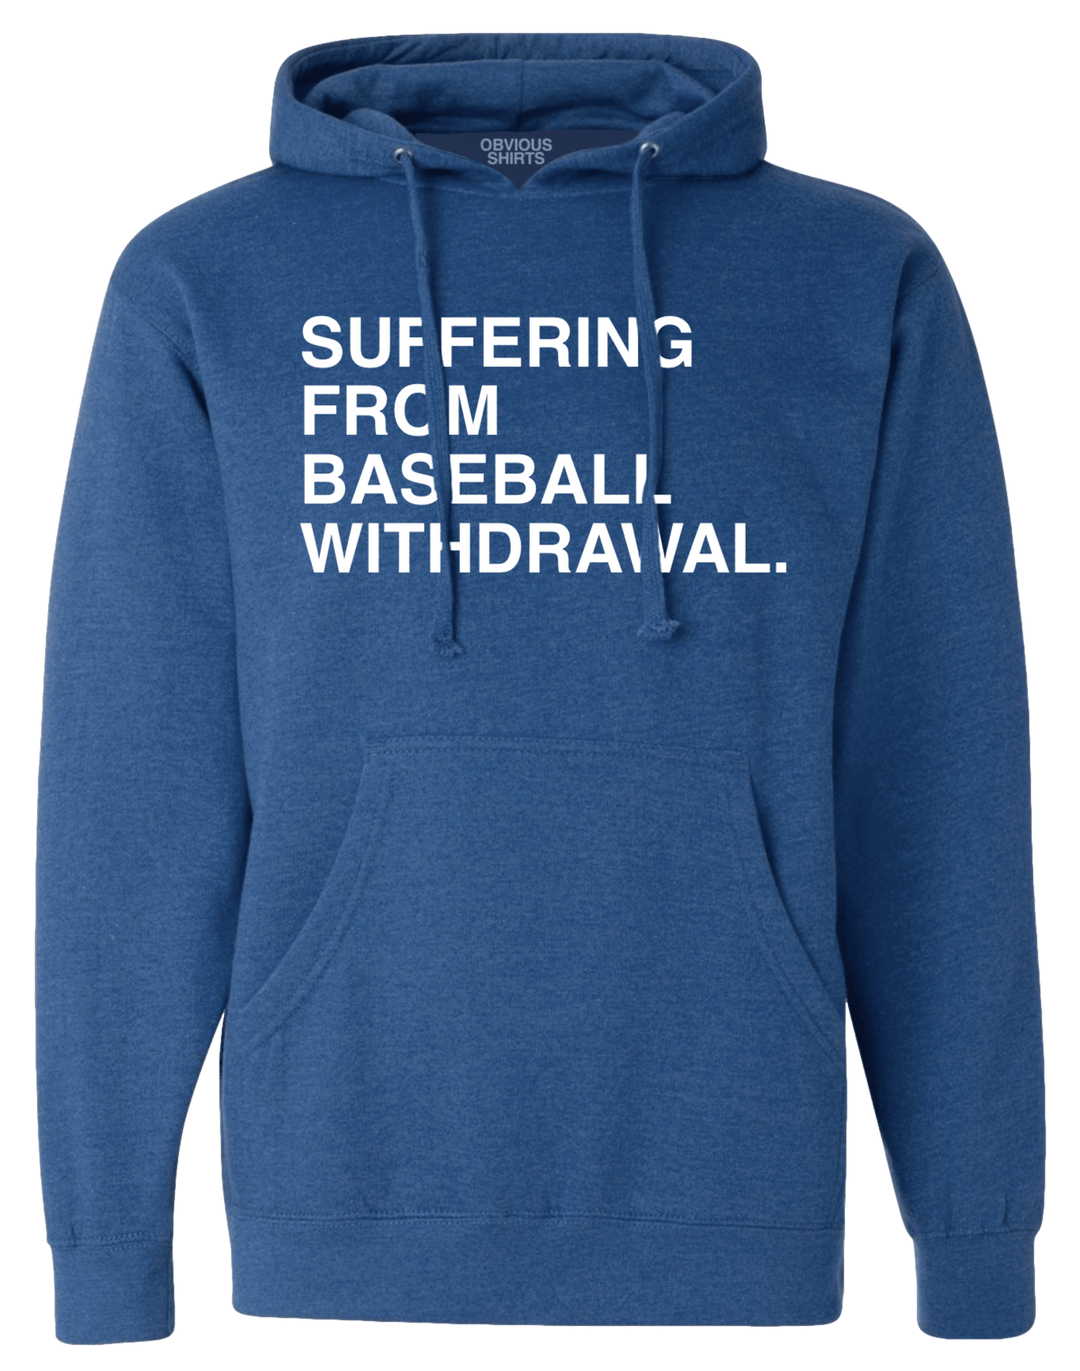 SUFFERING FROM BASEBALL WITHDRAWAL. (HOODED SWEATSHIRT) - OBVIOUS SHIRTS